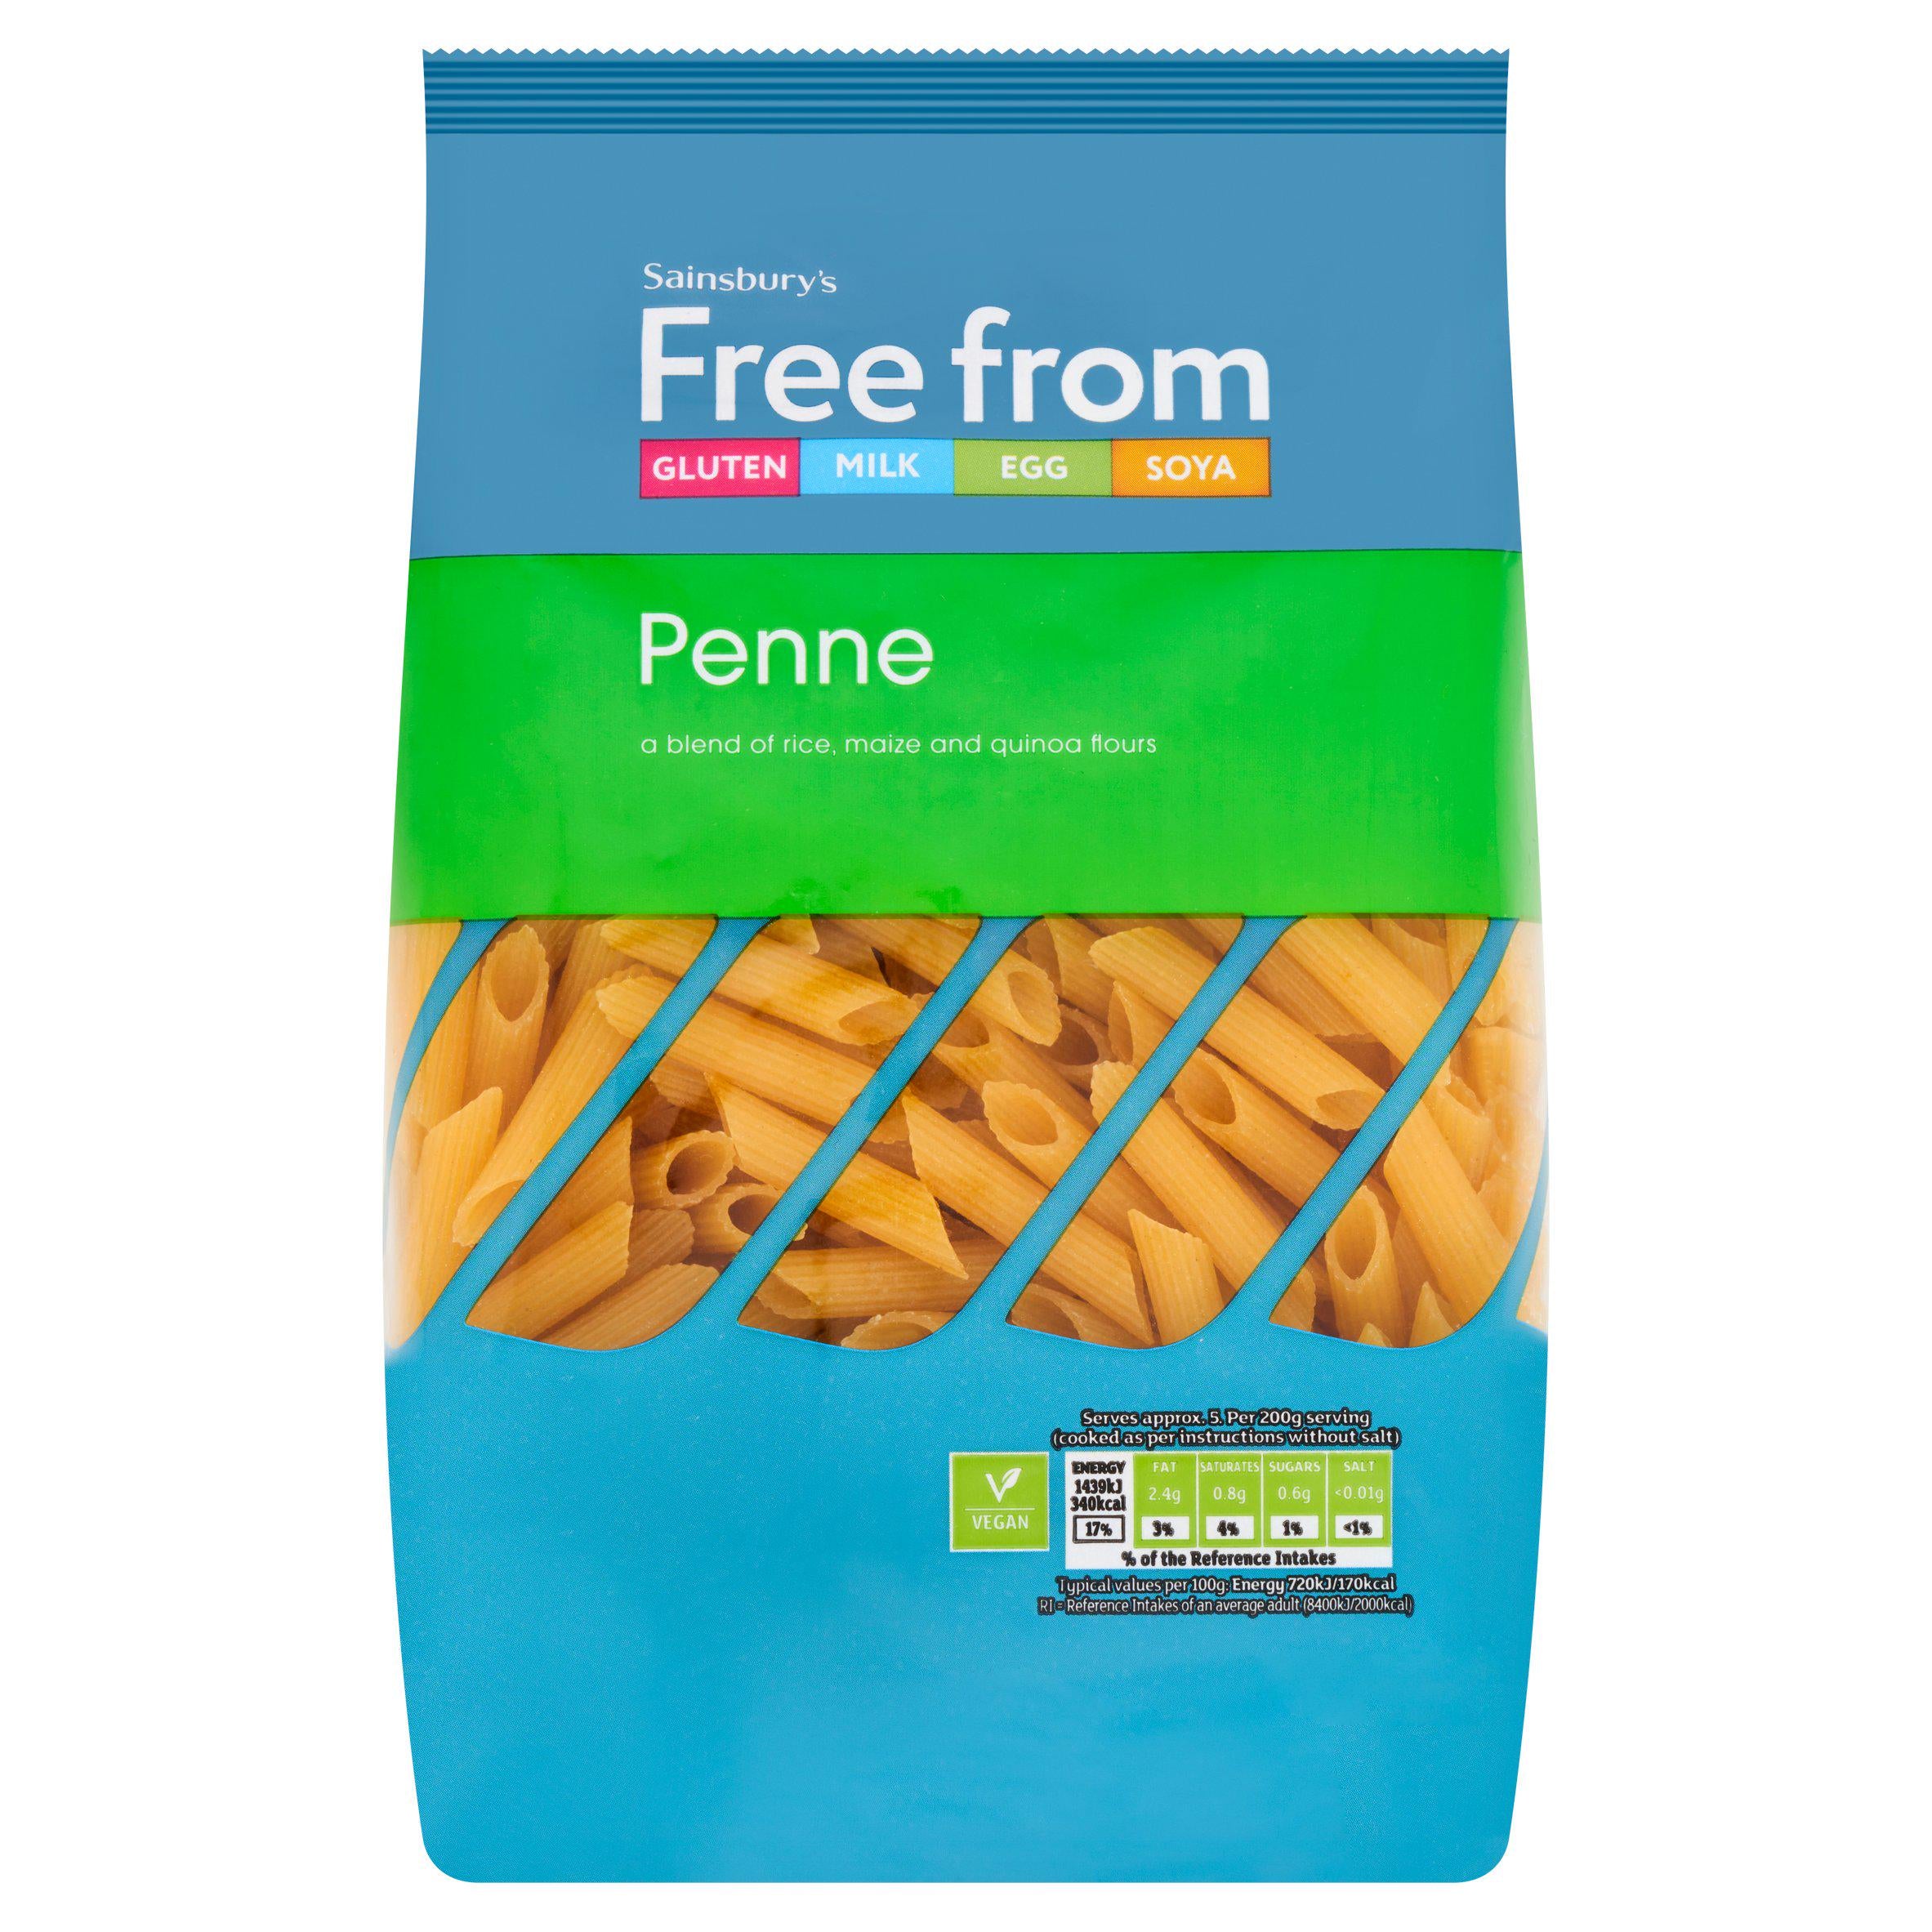 WSO - Sainsbury's Deliciously Free From Penne 500g 1x12